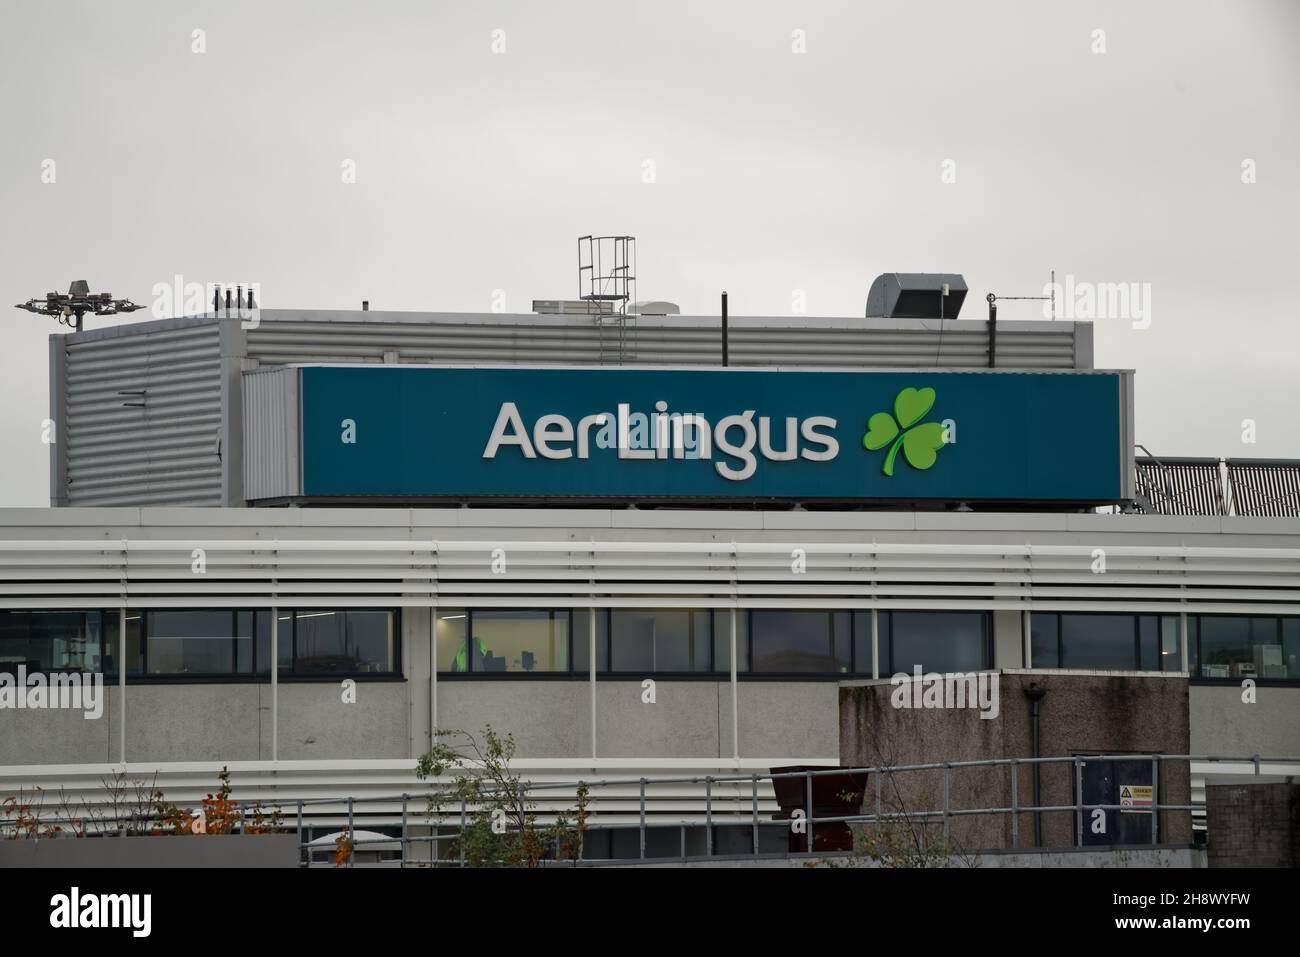 DUBLIN, IRELAND - Nov 11, 2021: Closeup shot of Aer Lingus name with green shamrock logo on the building at Dublin Airport. The Aer Lingus is the flag Stock Photo